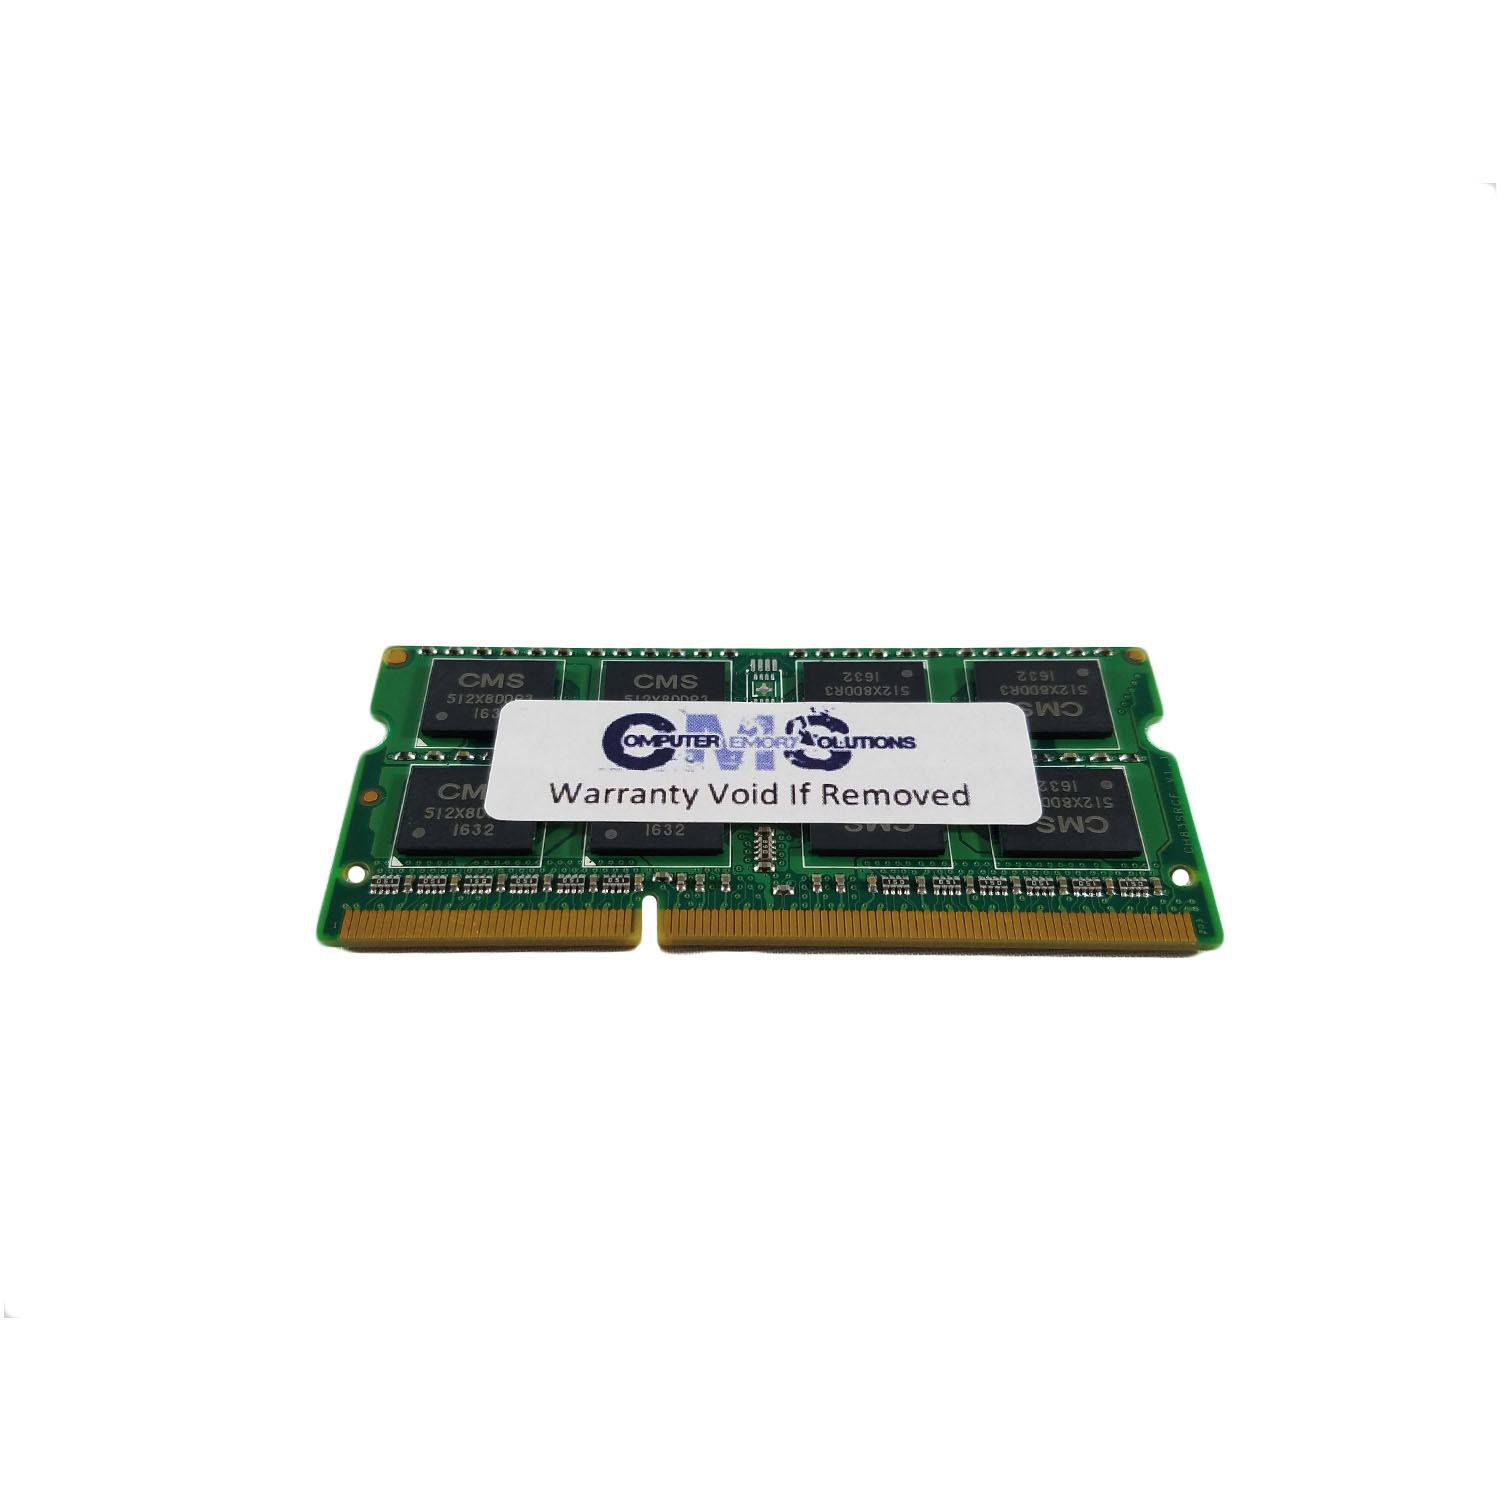 CMS 8GB (1X8GB) DDR3 12800 1600MHz NON ECC SODIMM Memory Ram Upgrade Compatible with Panasonic® Toughbook 52 Mk5 Cf-52 Cf-52S Cf-52T, Cf-52V - A9 - image 2 of 3